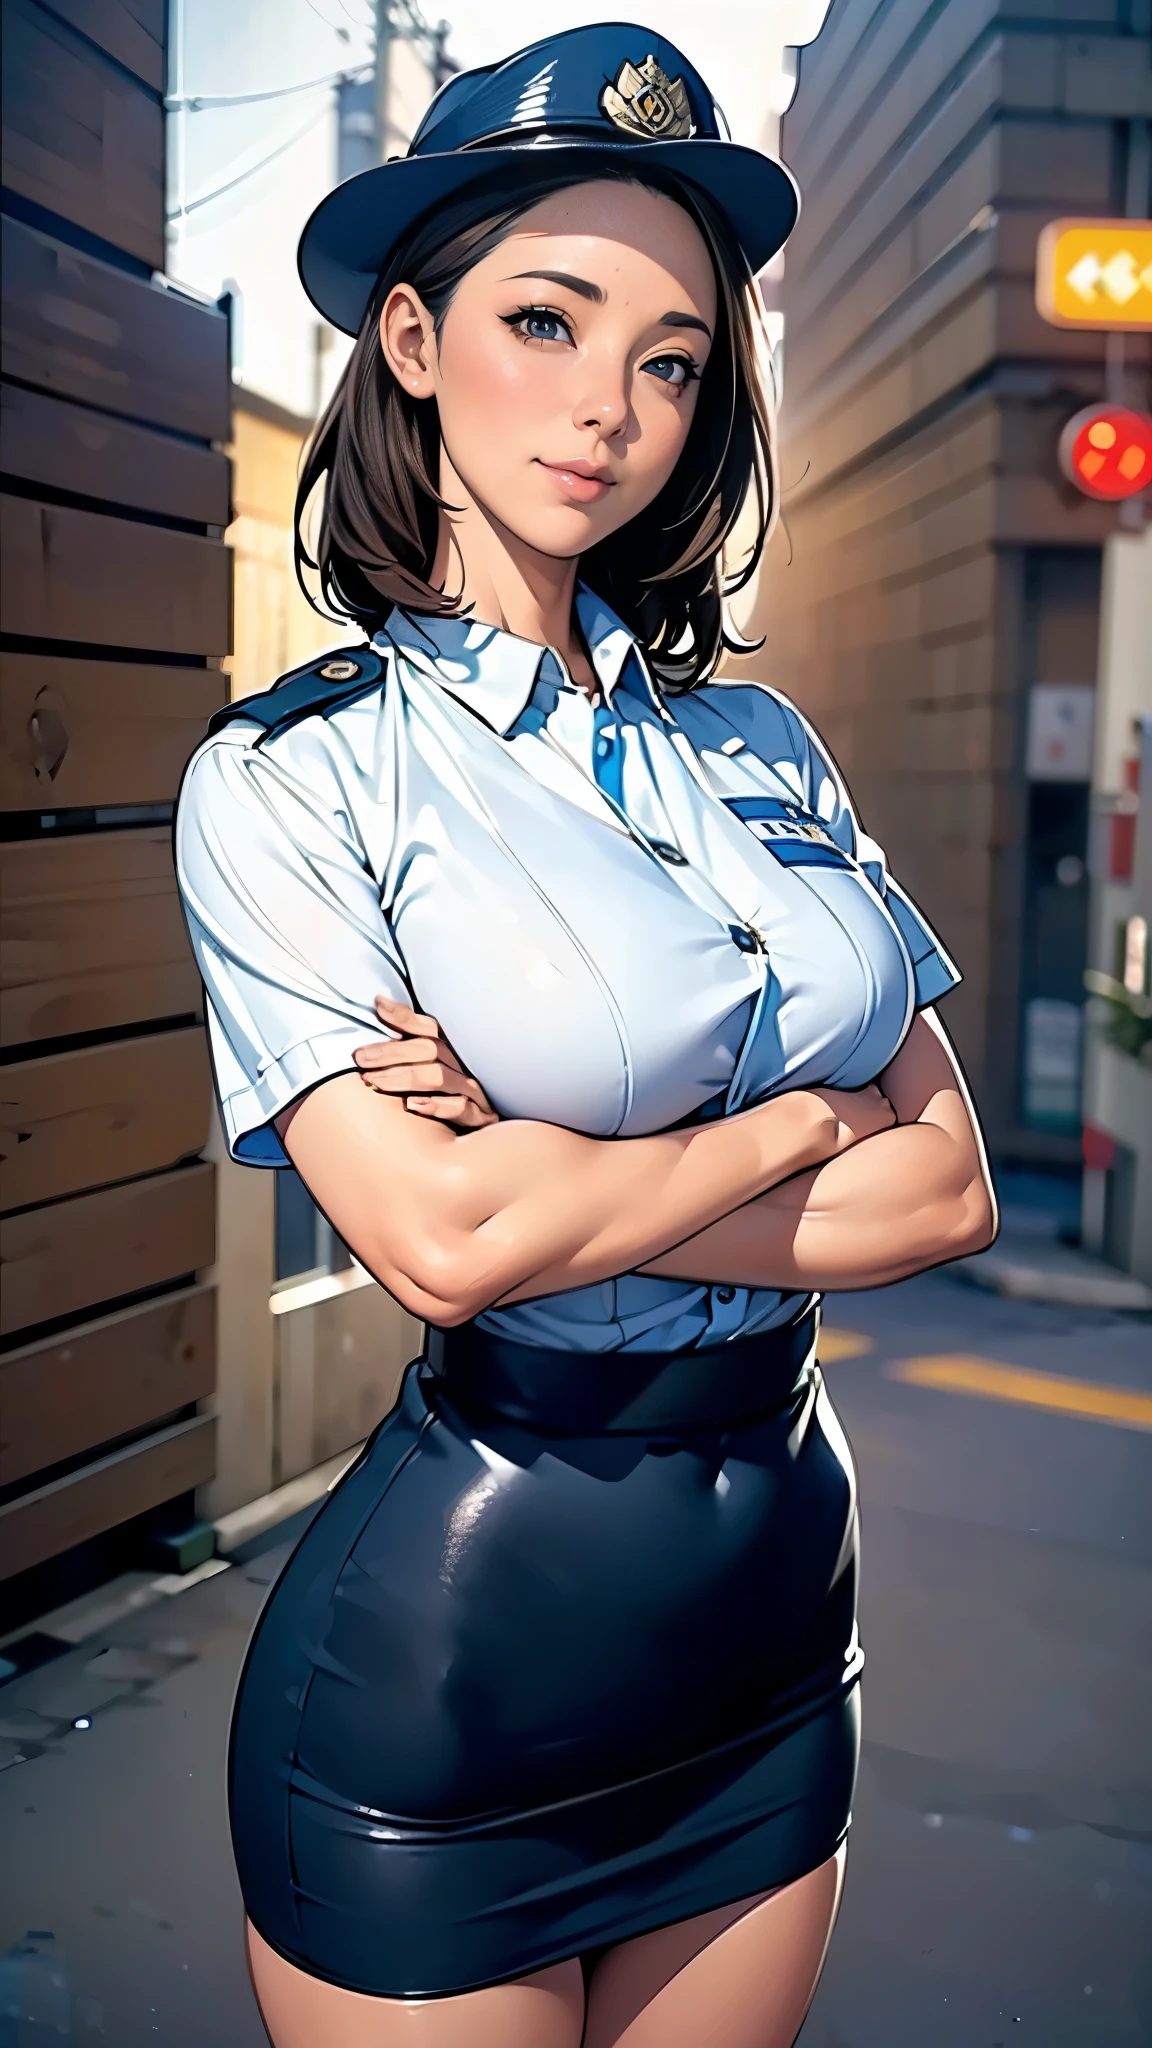 (masterpiece:1.2, highest quality), (Realistic, photoRealistic:1.4),Beautiful illustrations,(Natural Side Lighting, Cinema Lighting),1 female,Japanese,Mature Woman,Policewoman on patrol,48 years old,Perfect Face, Symmetrical face, Shiny skin,Random Hairstyles,Big eyes,Sexy Eyes,(smile),(whole body),BREAK((Police Officer Shirt)),((Tight mini skirt)),(Police hat),(The background is a street corner:1.5),(((Background Blur:1.5))),((police uniform)),(((Crossed arms)))